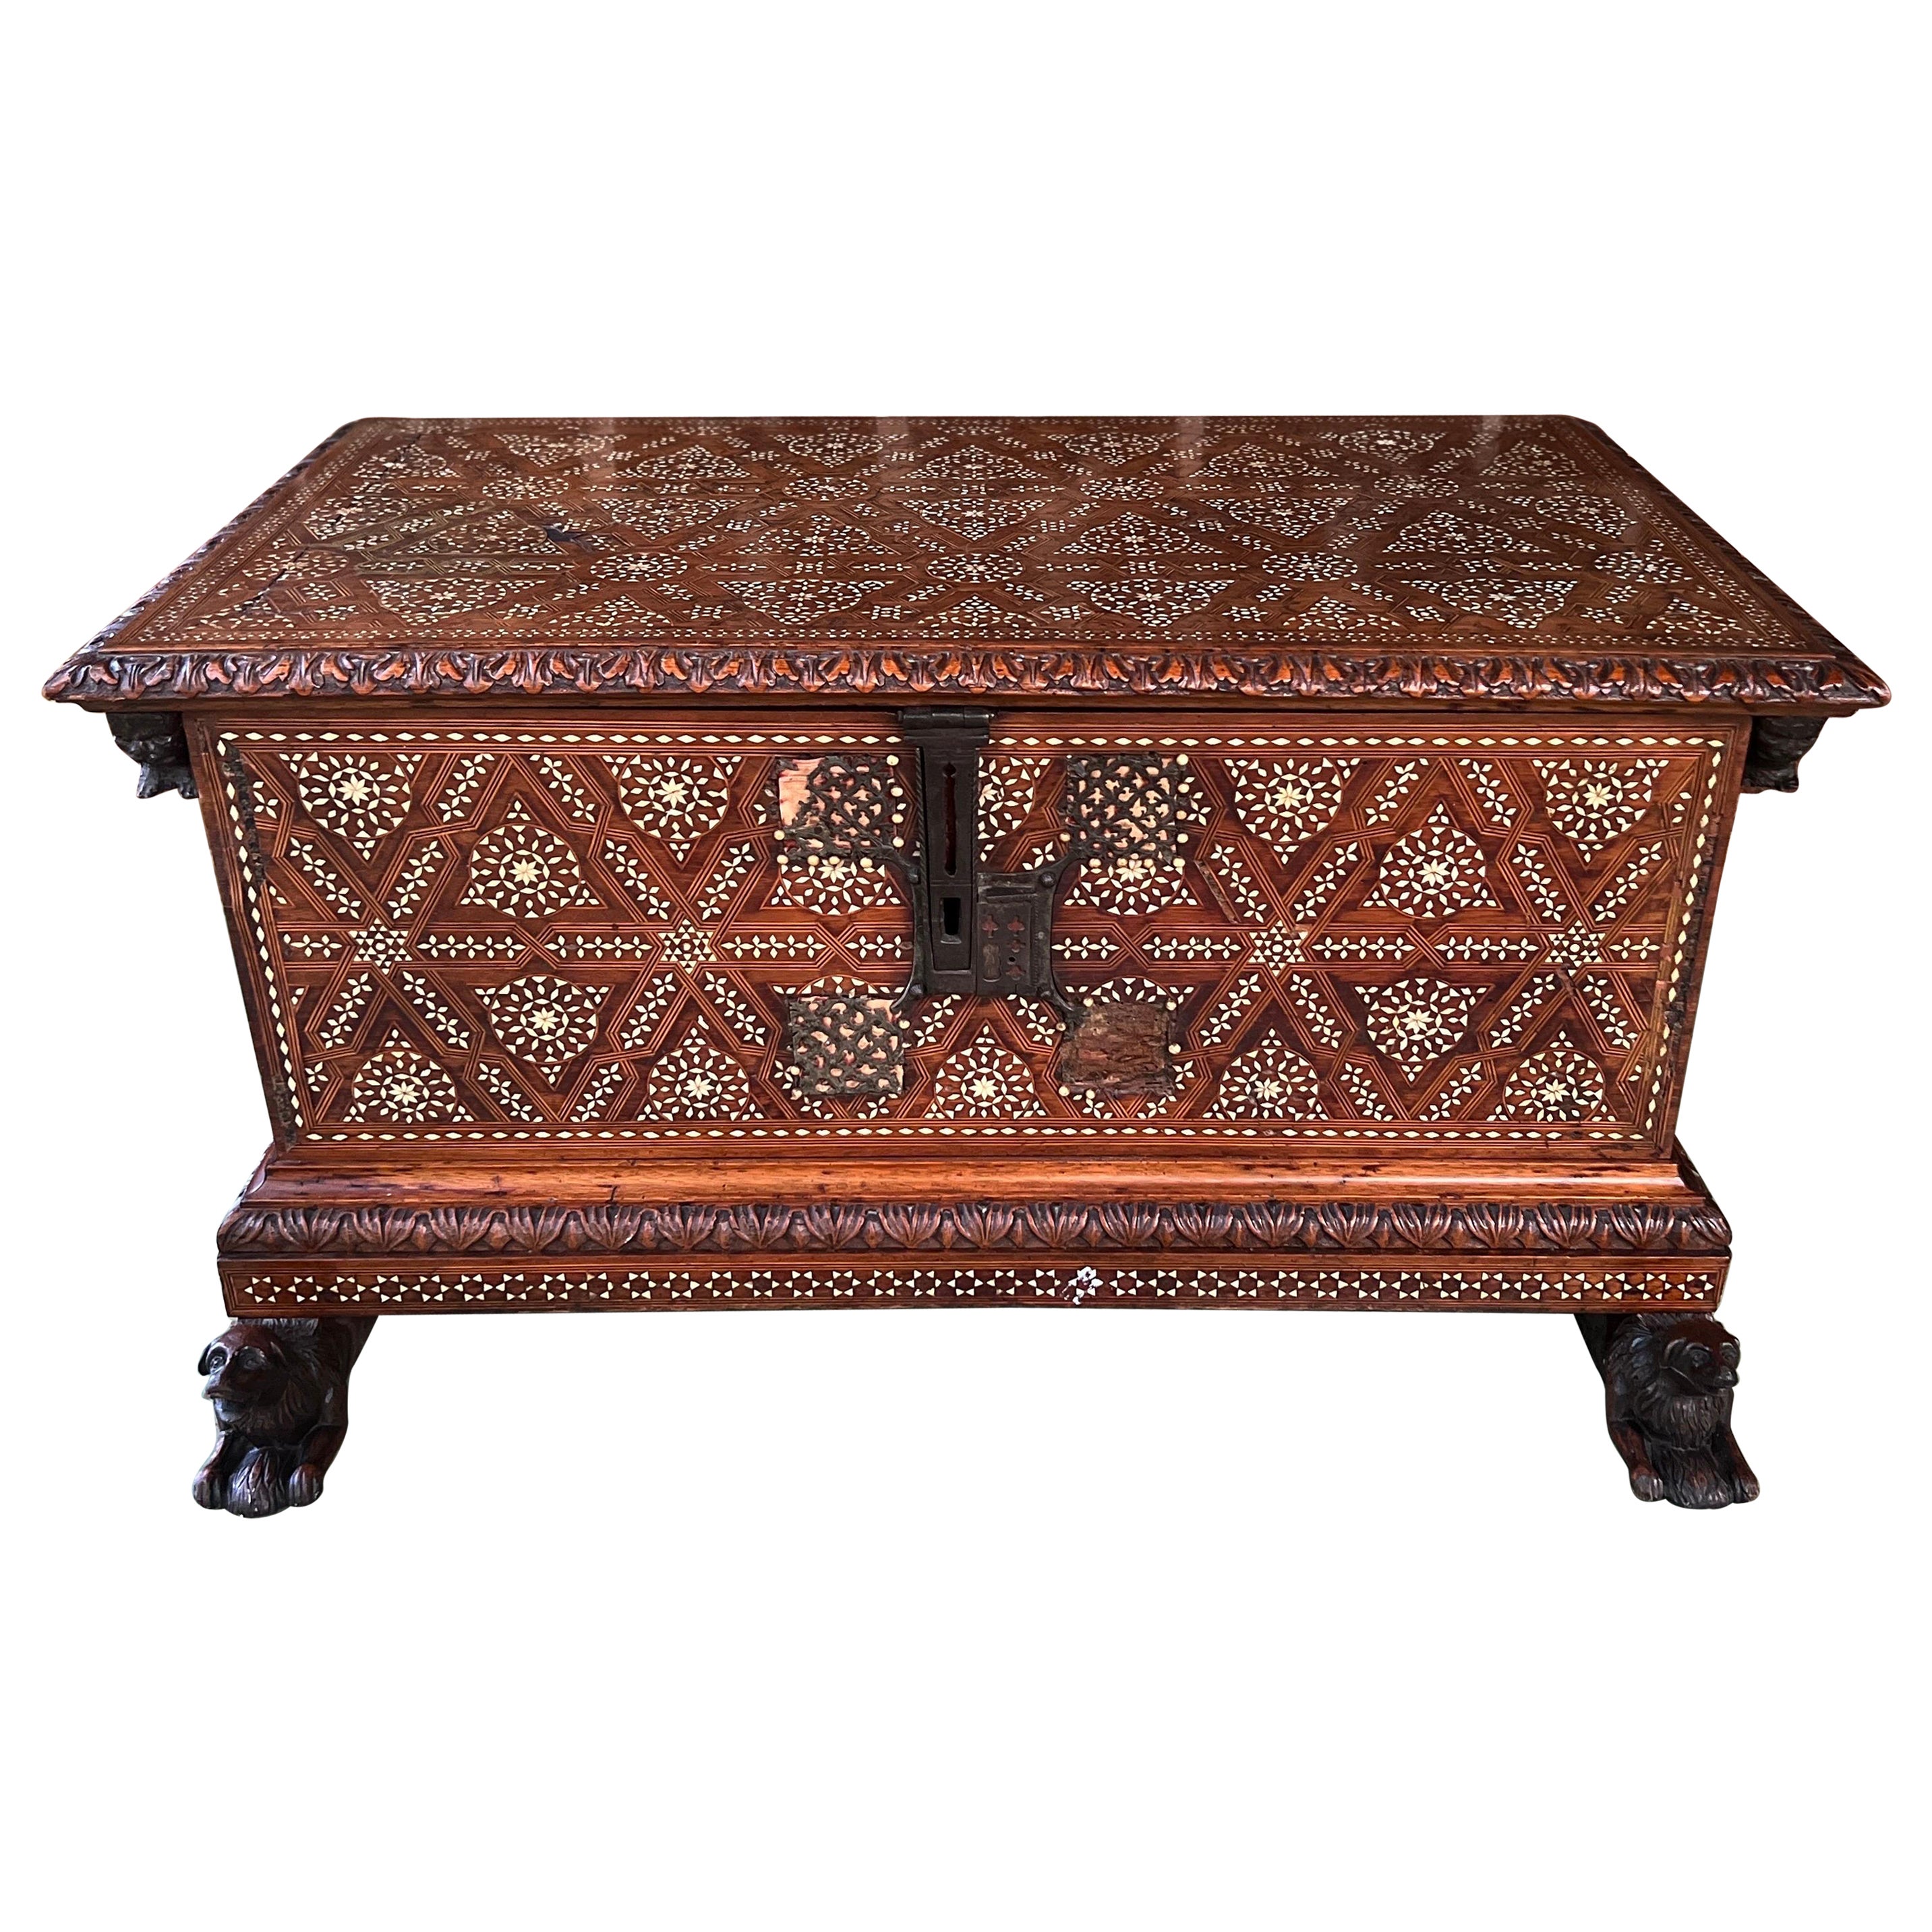 Museum Quality 18th Century Syrian Anglo Indian Carved & Inlaid Blanket Chest For Sale